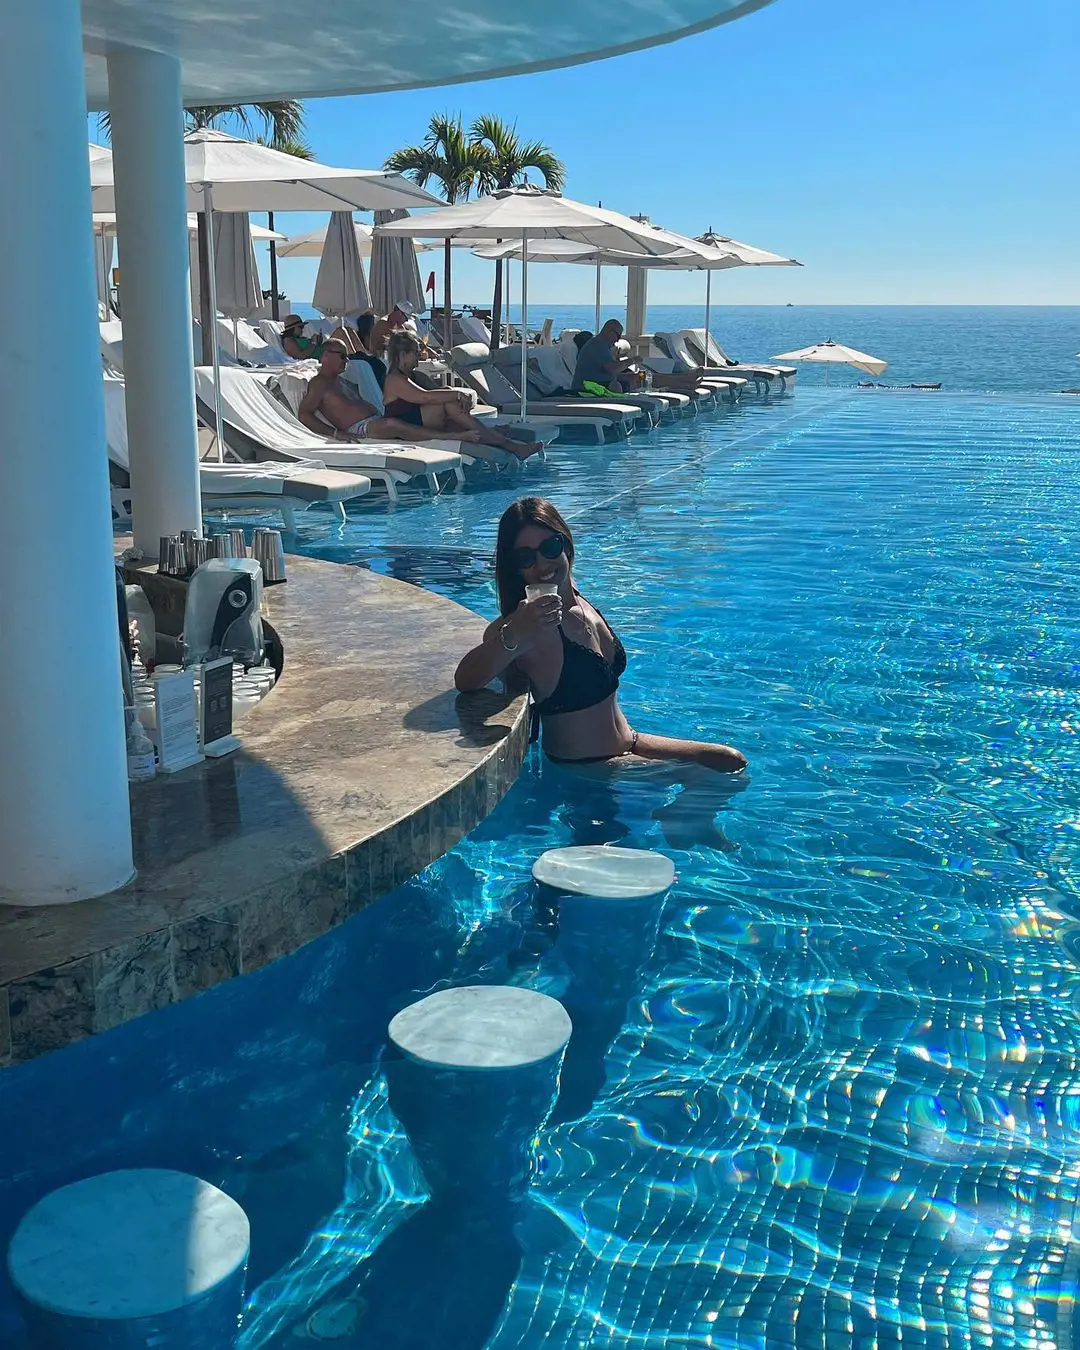 She enjoying her vacation in the pool at Cabo San Lucas, Mexico